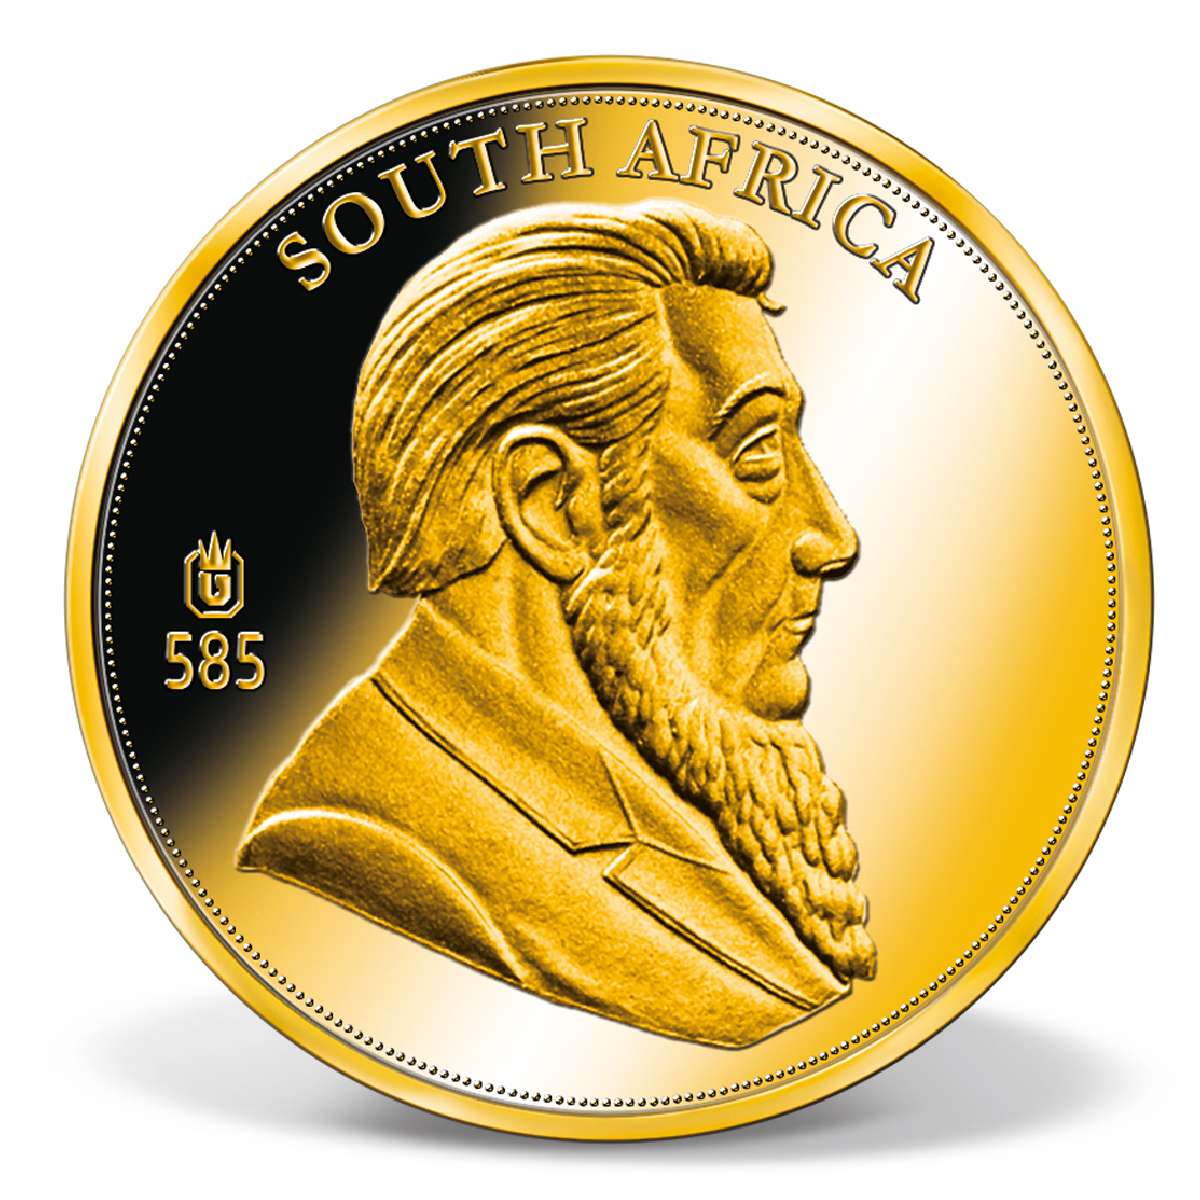 50 Years Investment Strike Commemorative Gold Coin